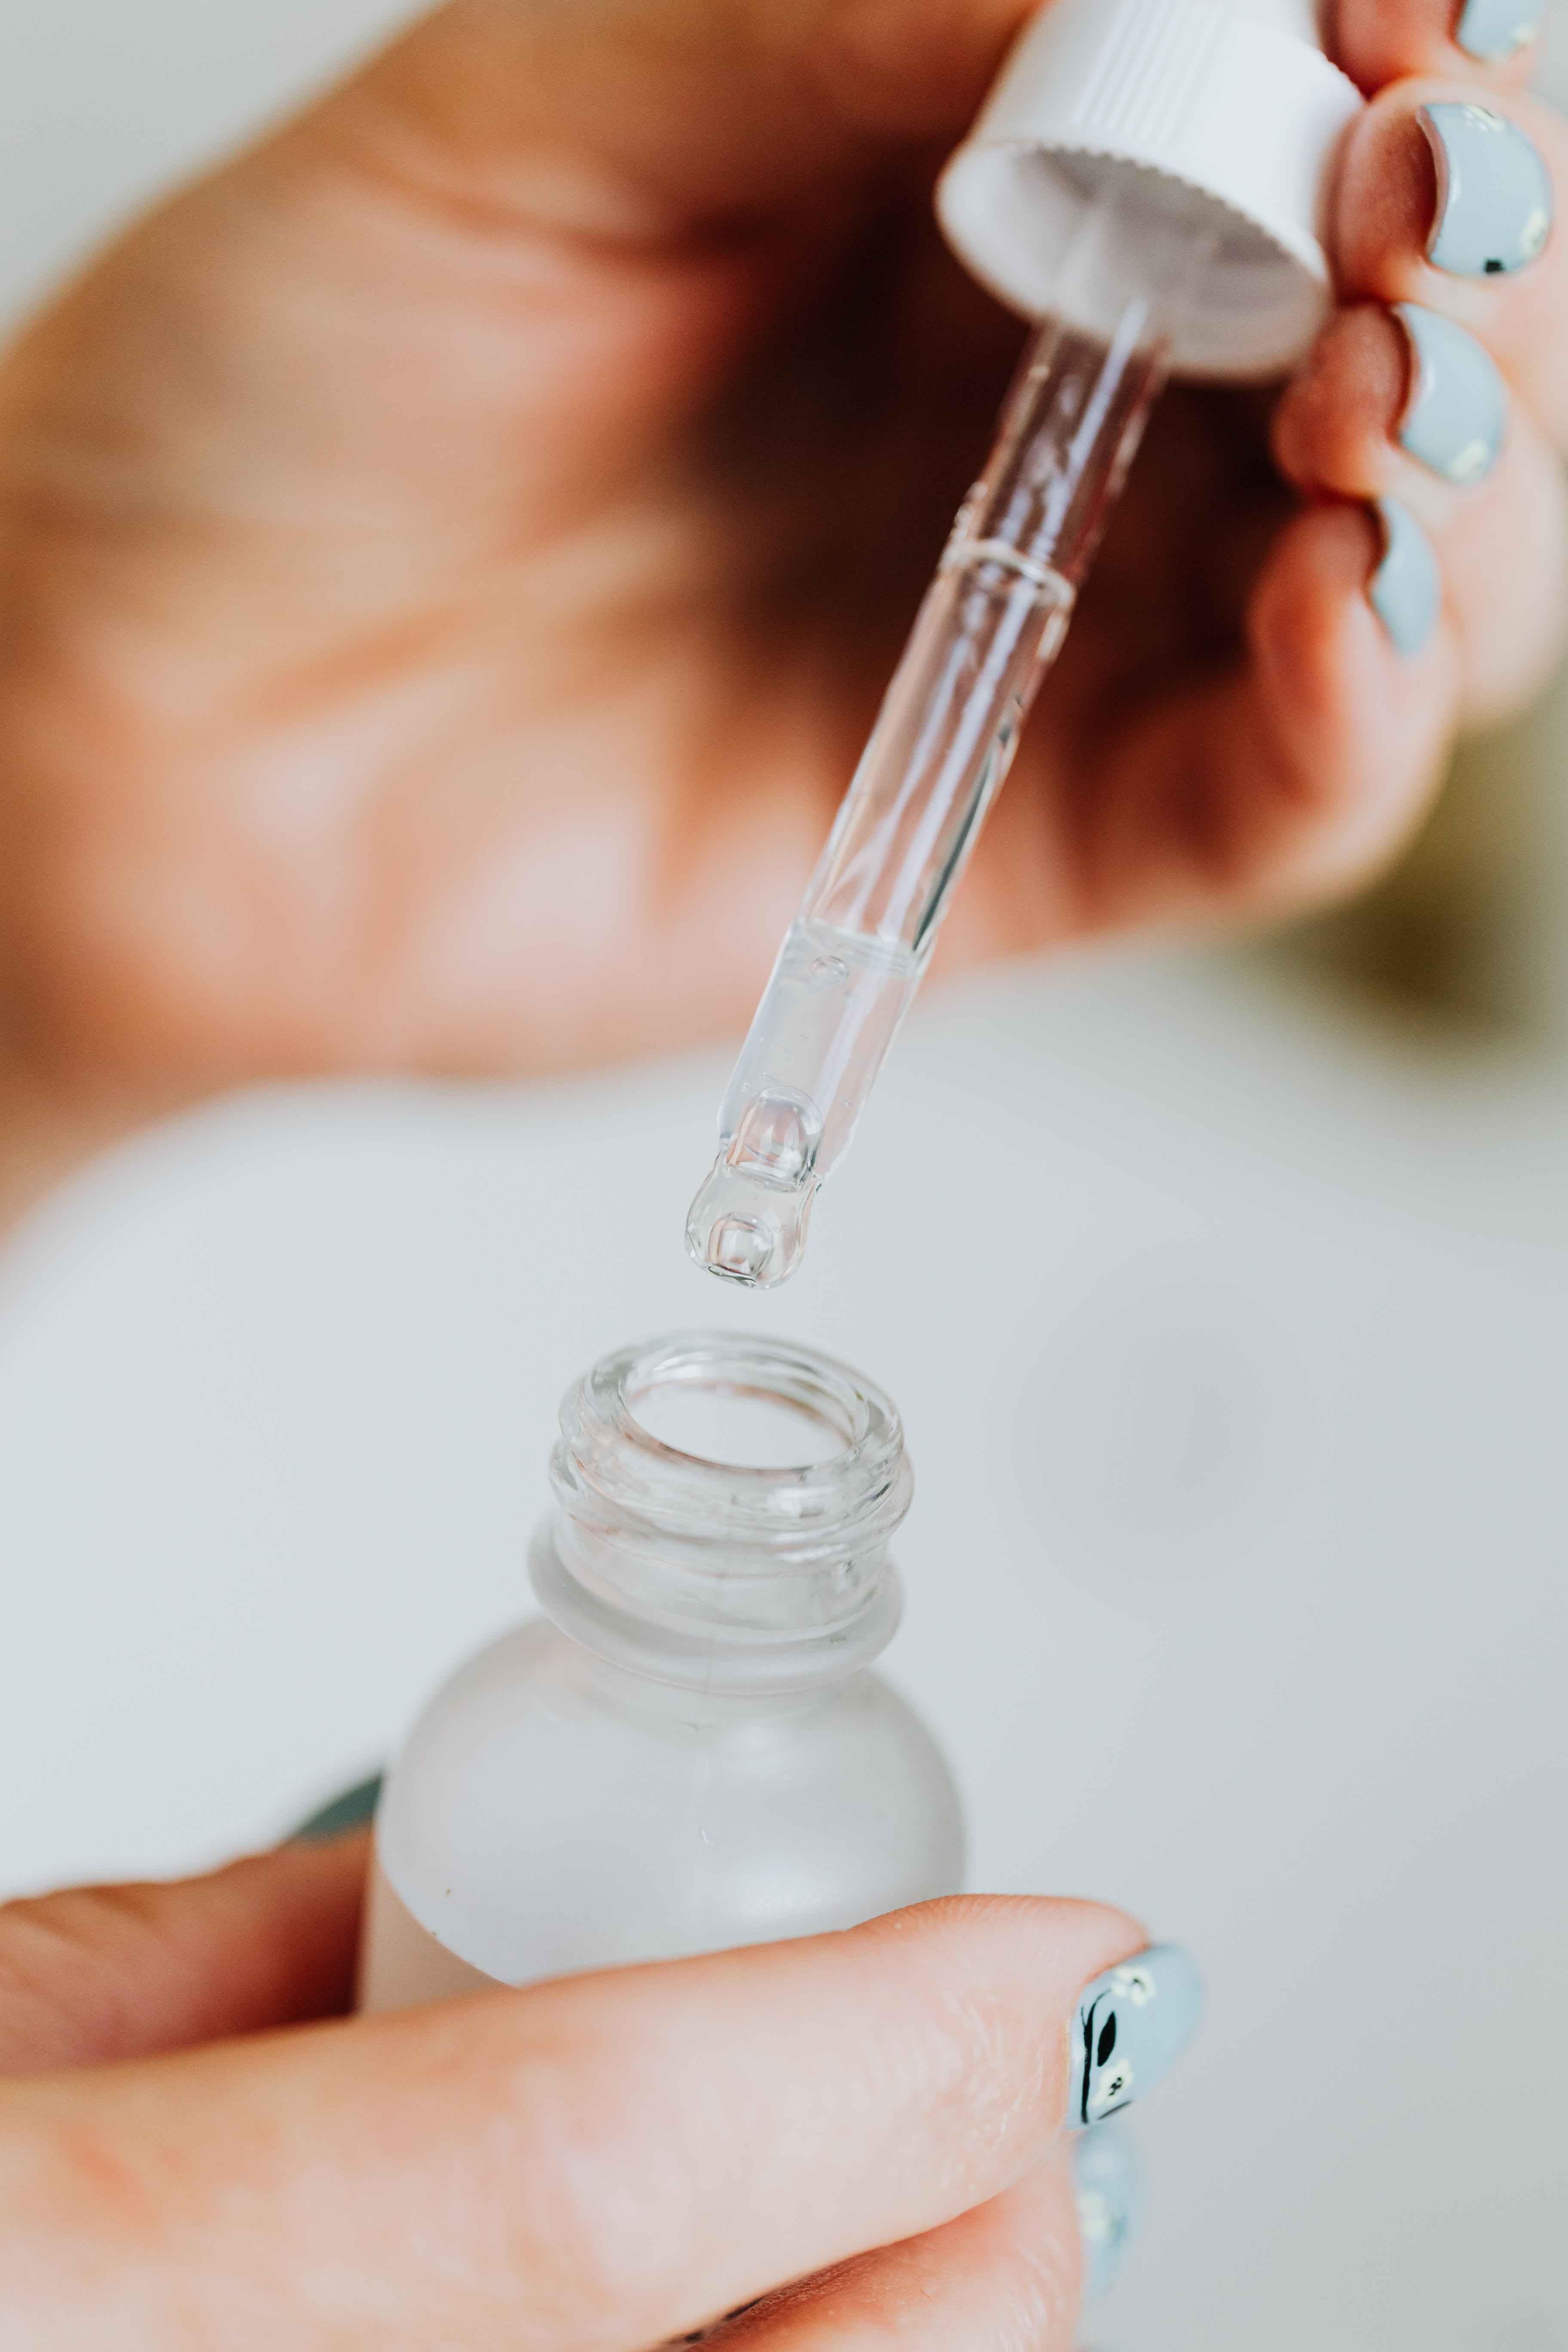 A woman takes out a solution from the small bottle. | Source: Pexels